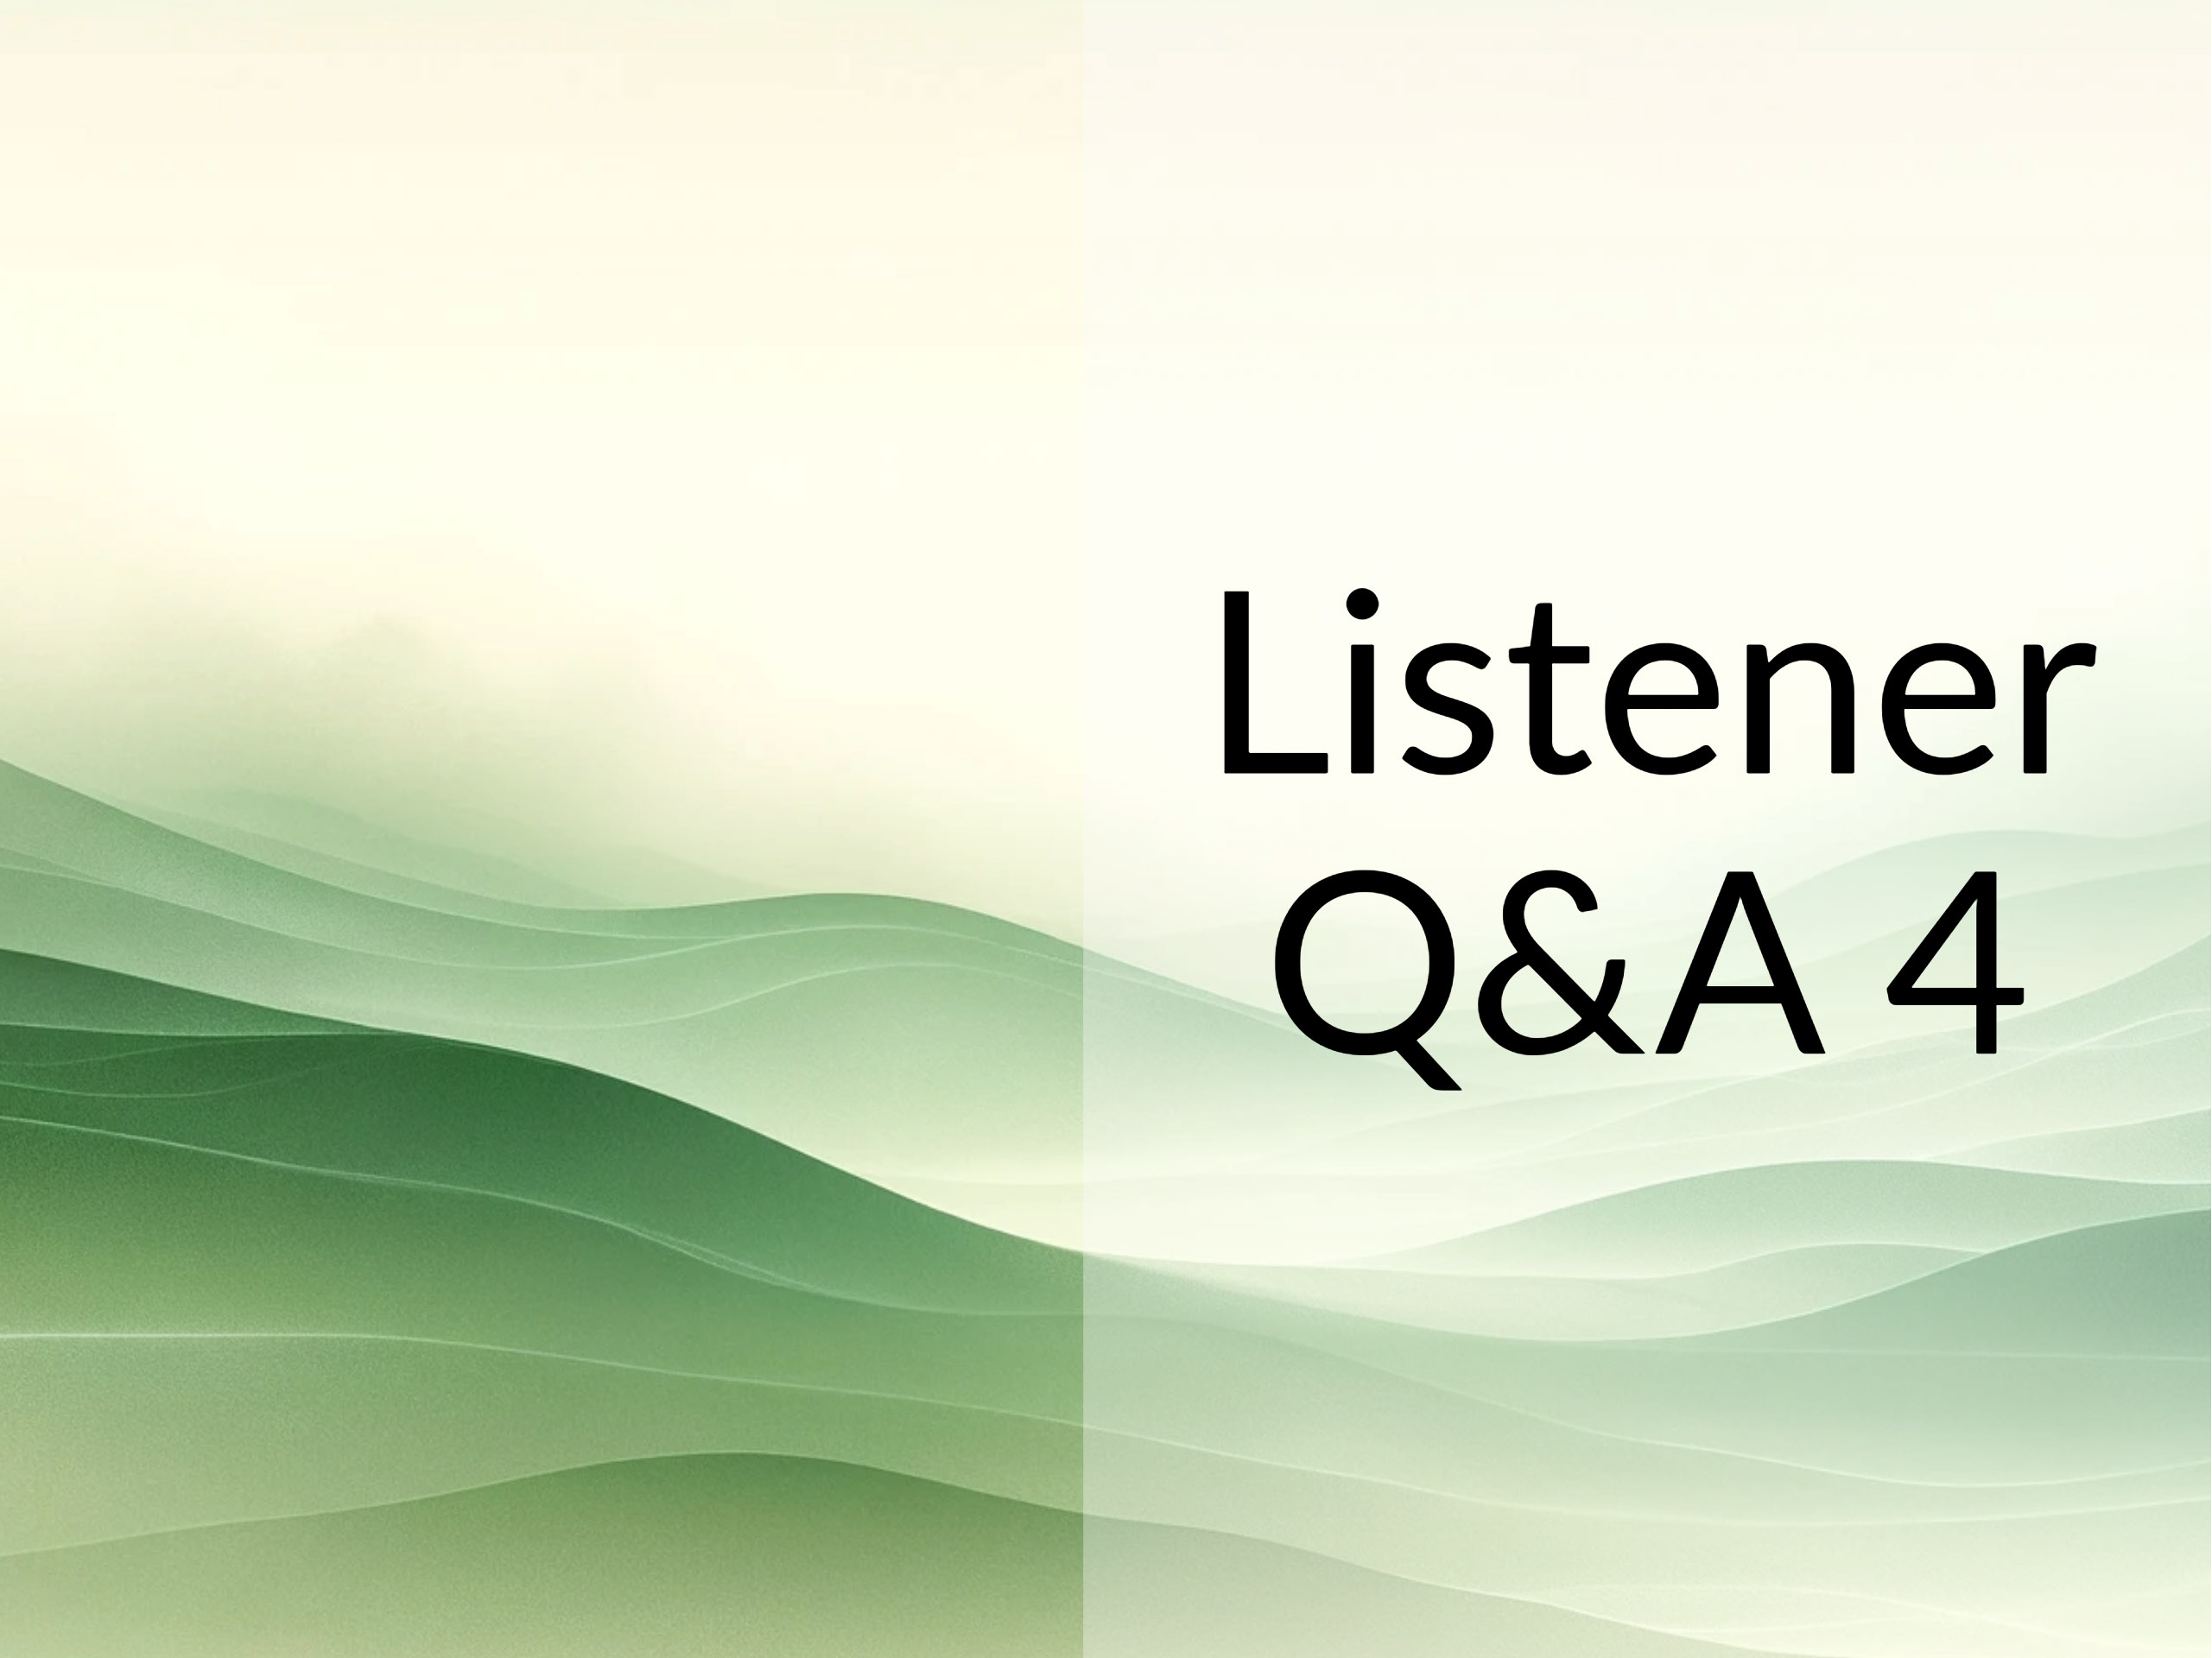 Abstract green background reminiscent of mountains with the caption "Listener Q&A 4"